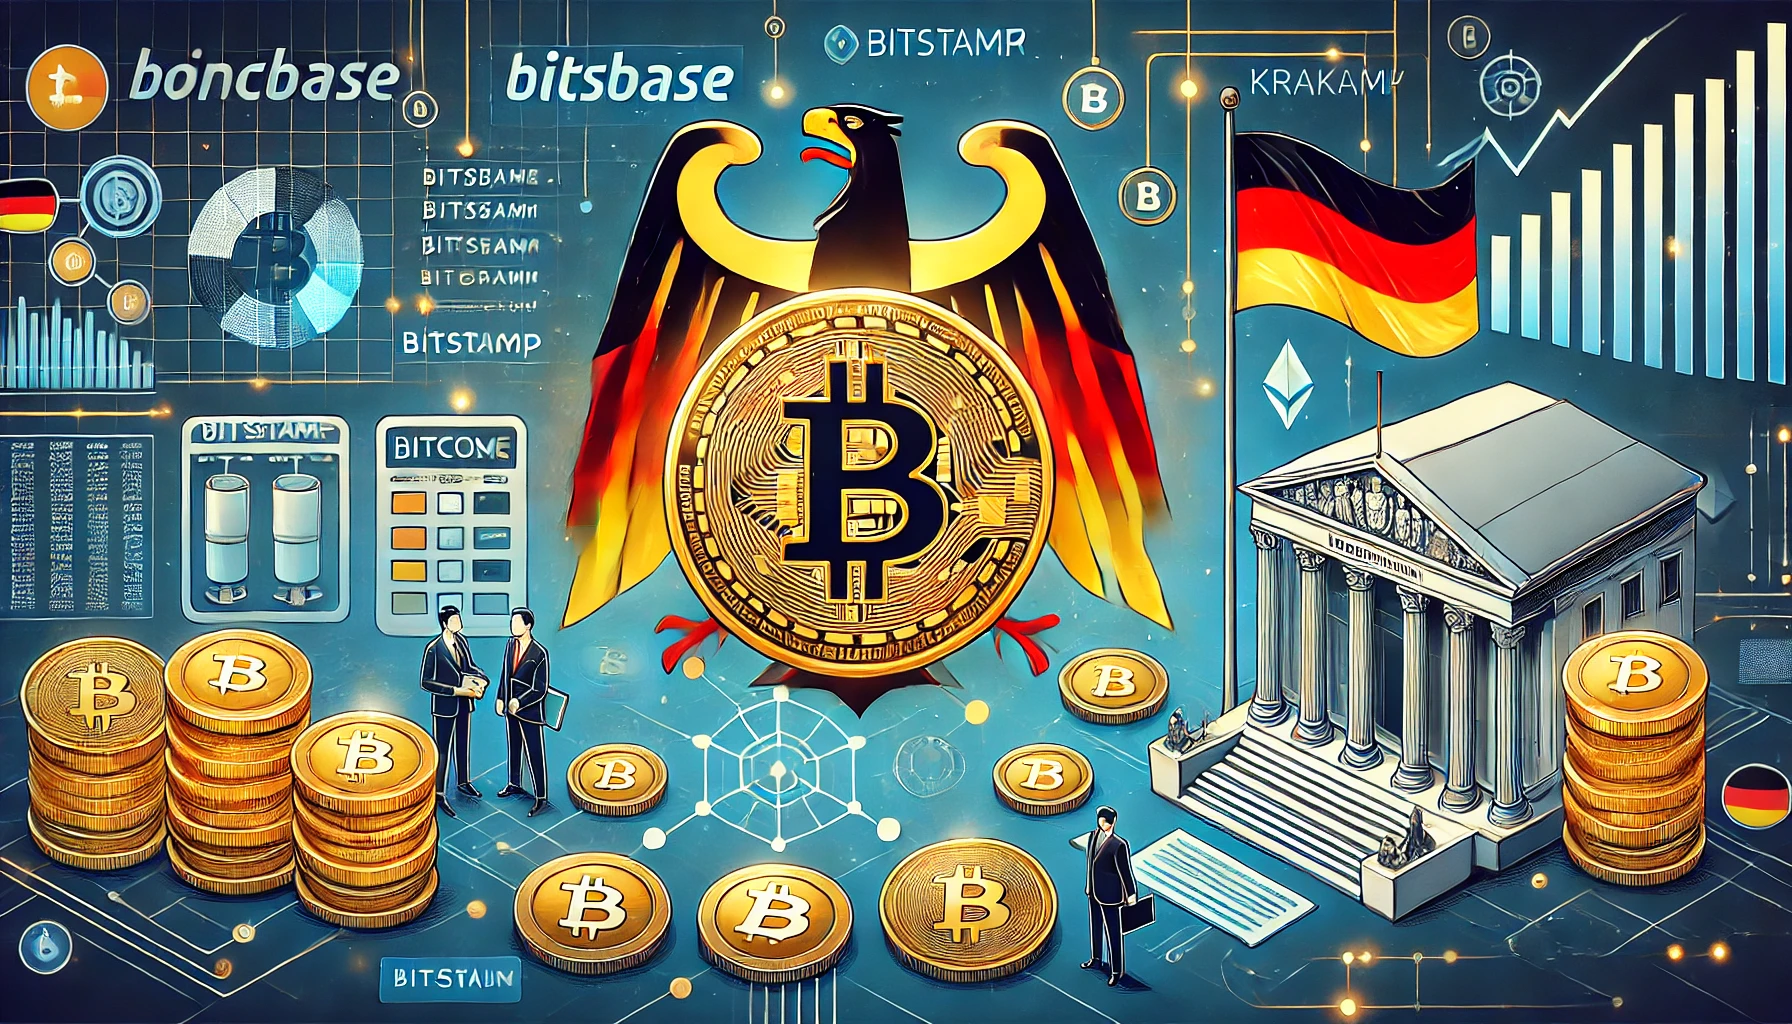 German flag and Bitcoin symbols, representing Germany's involvement in Bitcoin transactions. Include elements of major cry